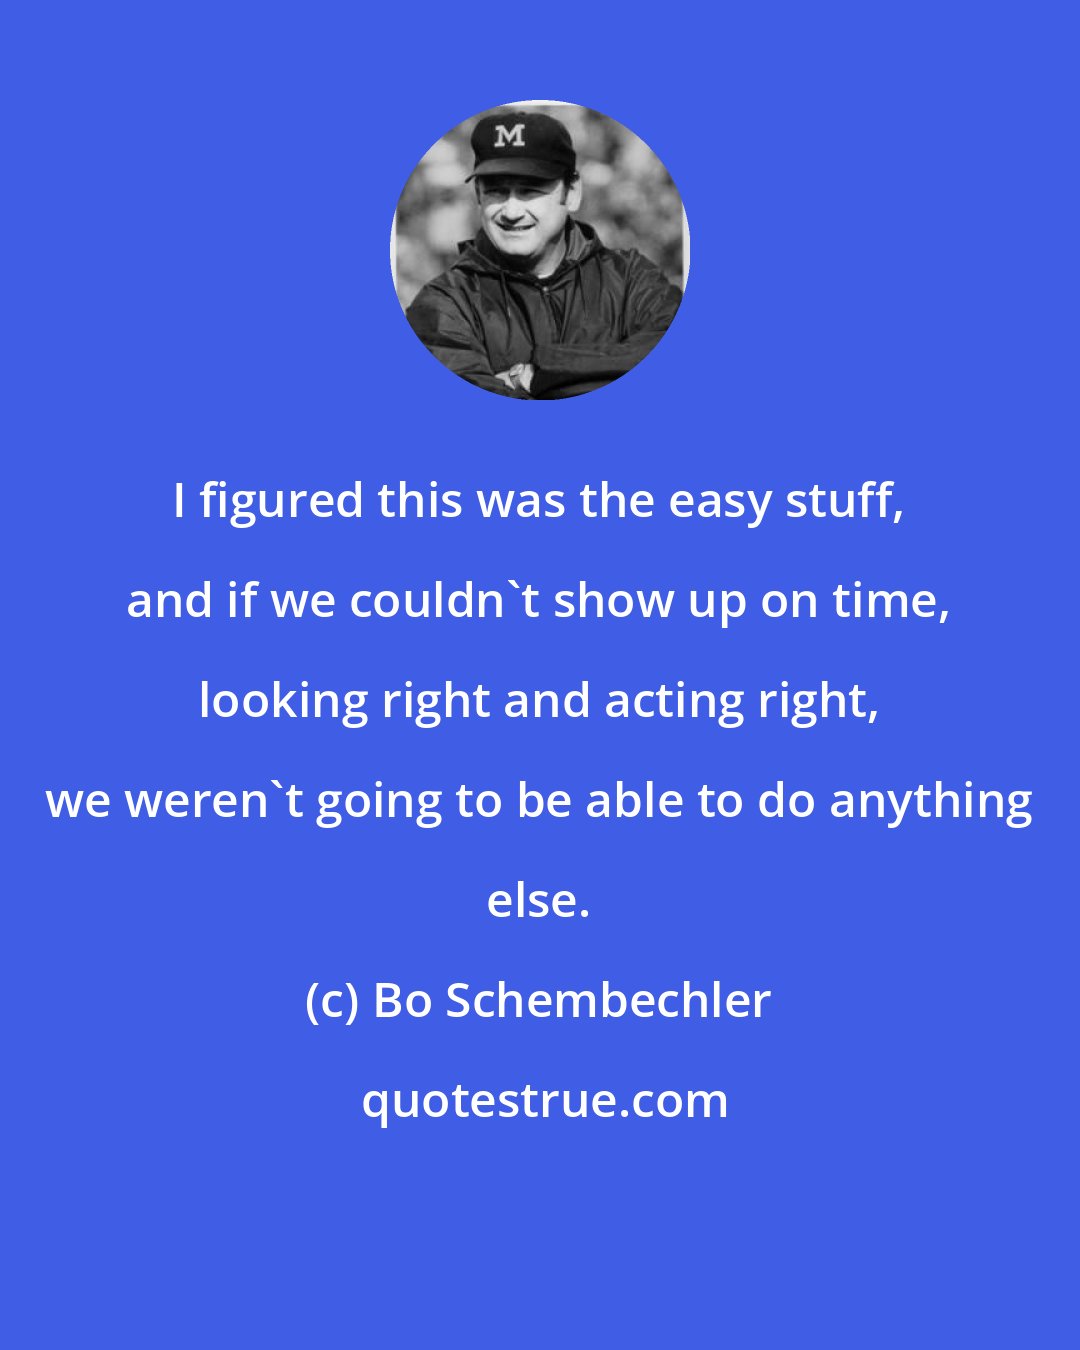 Bo Schembechler: I figured this was the easy stuff, and if we couldn't show up on time, looking right and acting right, we weren't going to be able to do anything else.